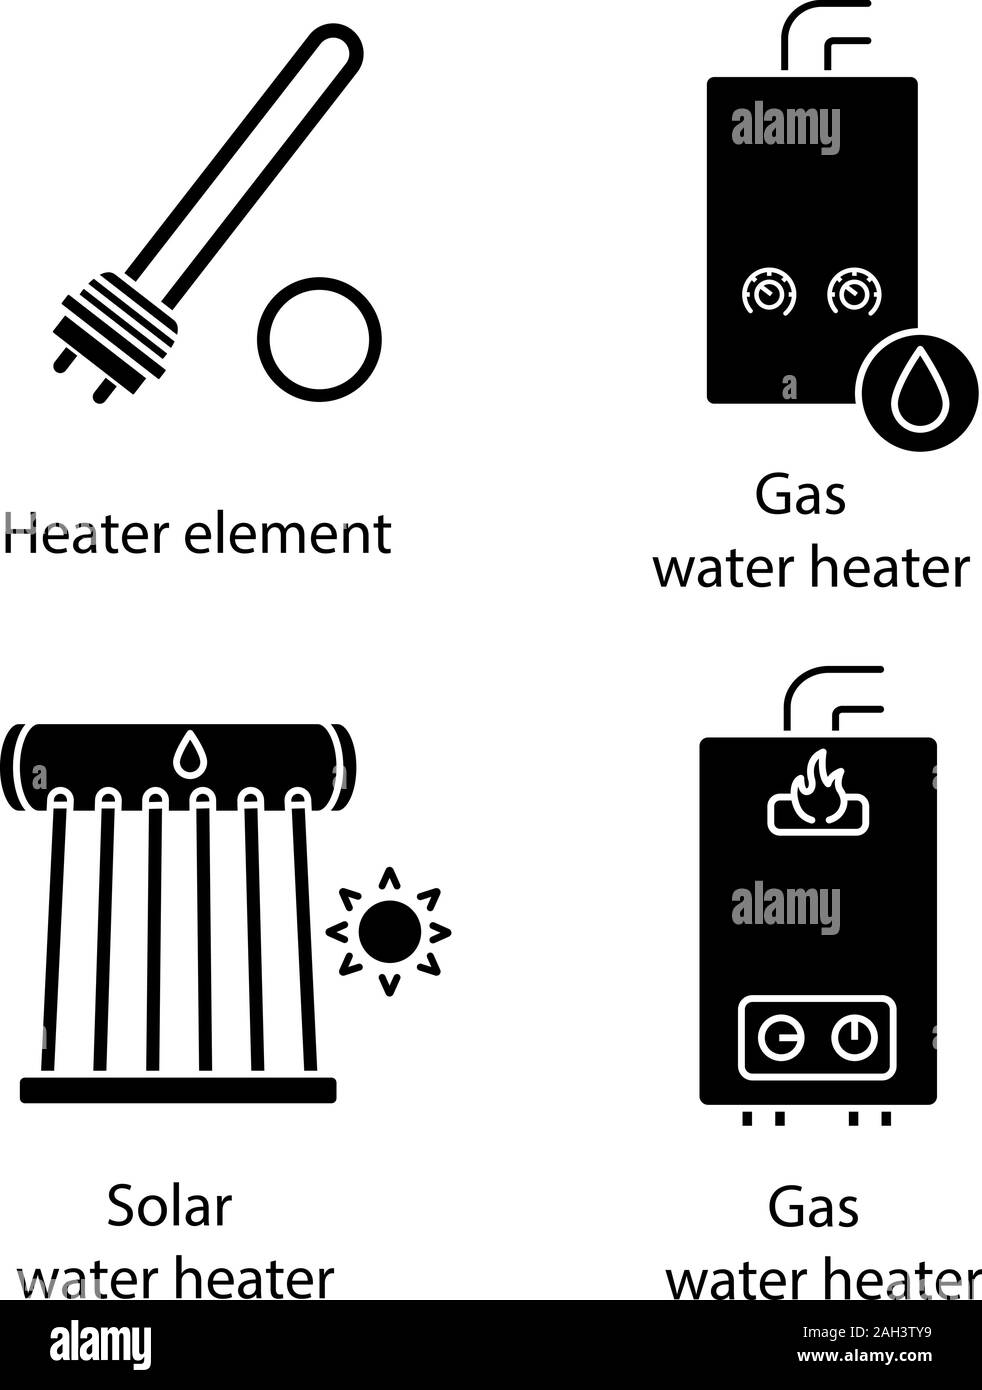 Heating glyph icons set. Electric and gas water heaters, heating boiler, industrial water heater. Silhouette symbols. Vector isolated illustration Stock Vector